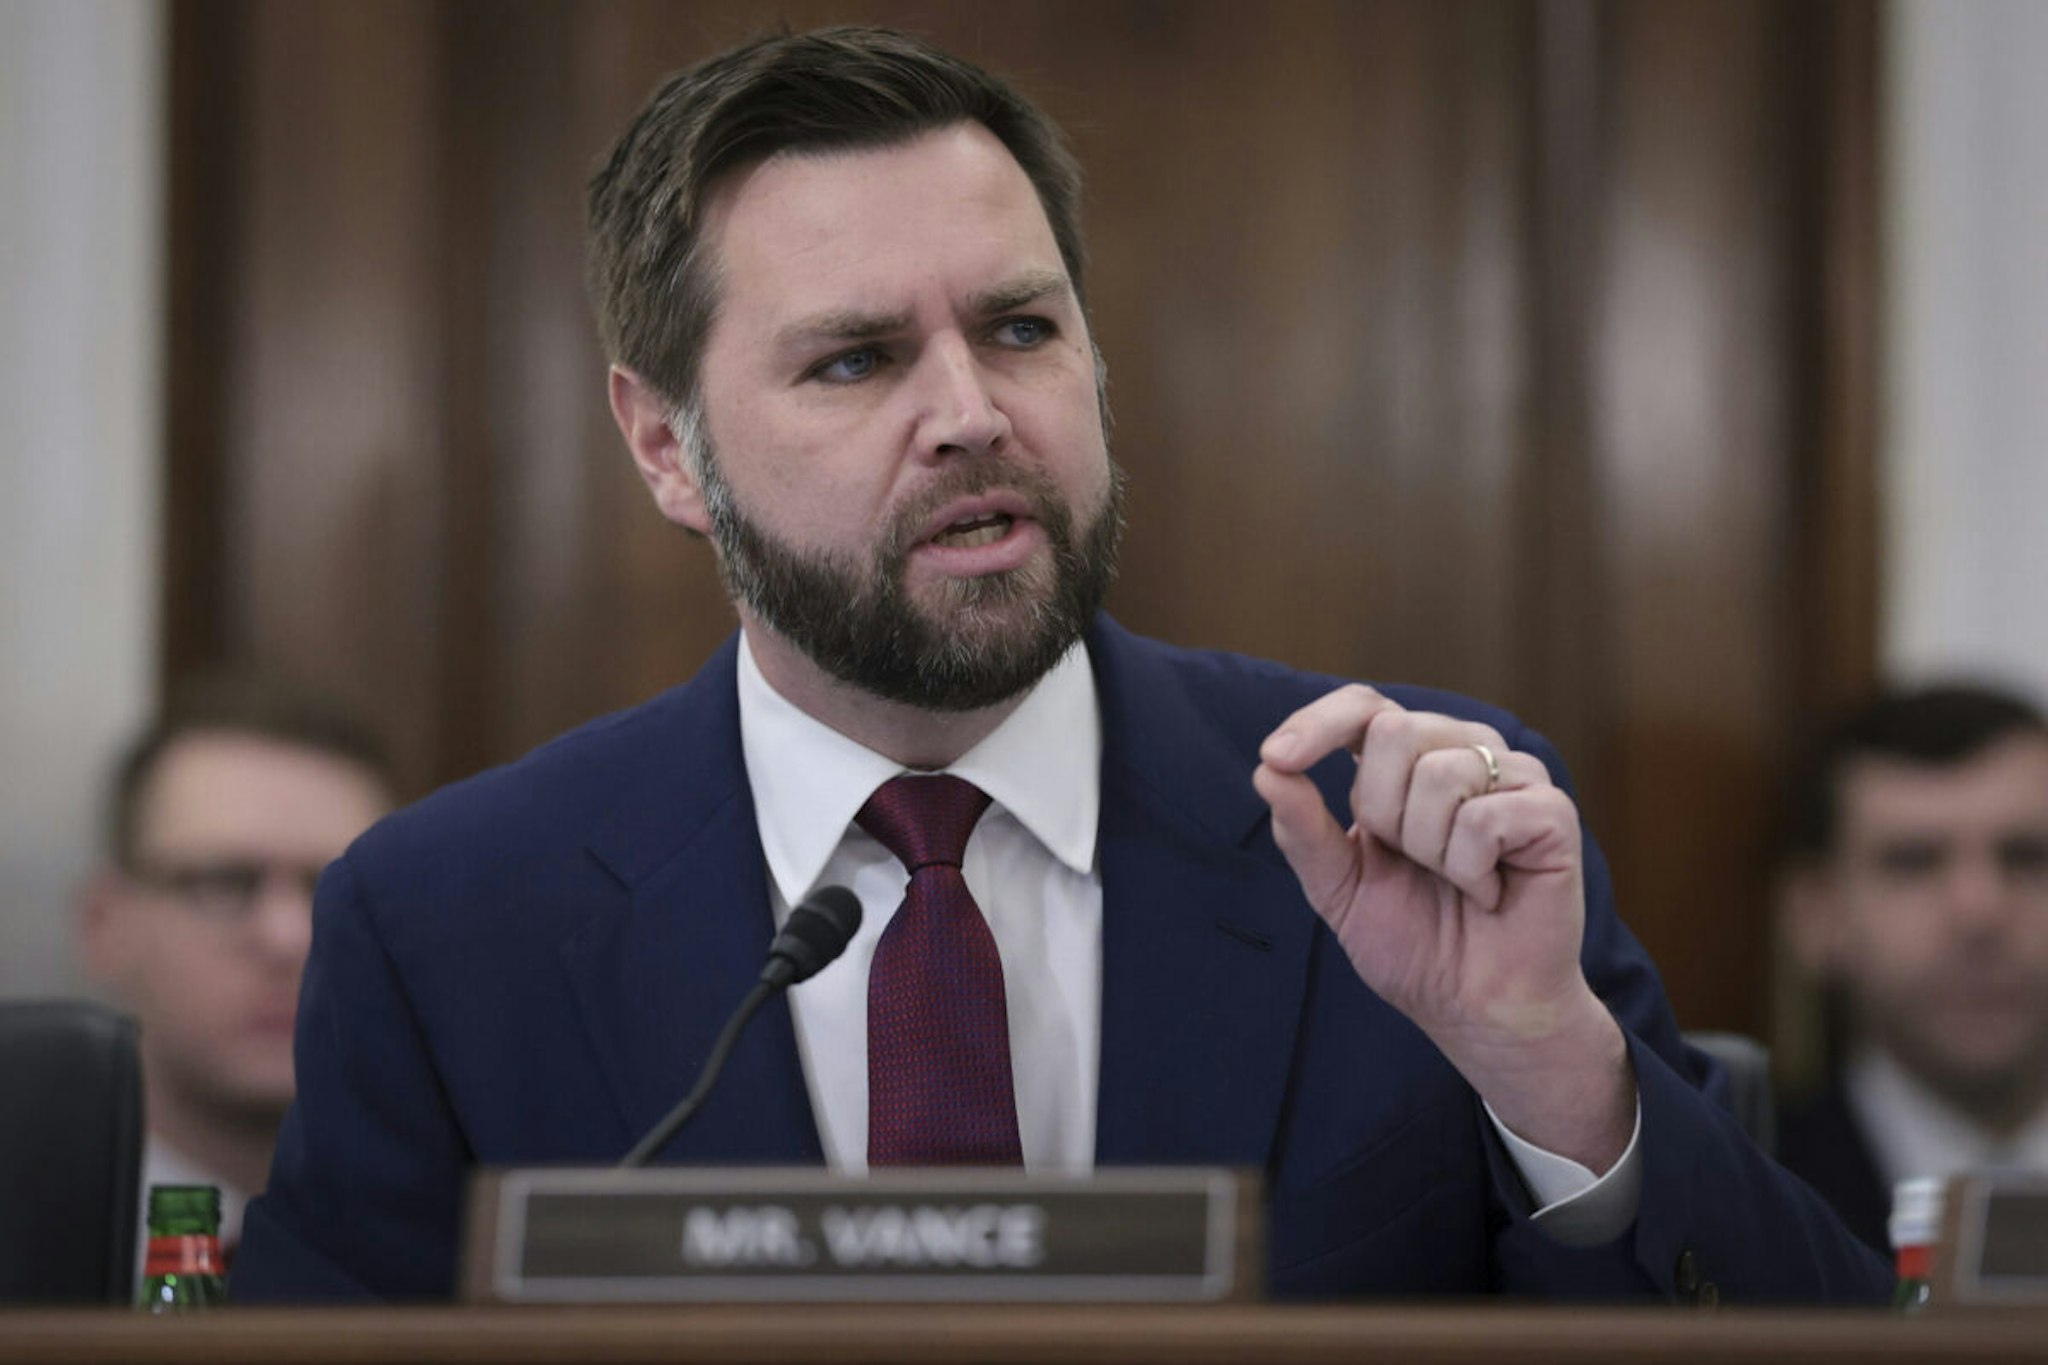 WASHINGTON, DC - MARCH 22: Sen. J.D. Vance (R-OH) delivers remarks during a hearing held by the Senate Commerce, Science, and Transportation Committee on March 22, 2023 in Washington, DC. The committee heard testimony on "Improving Rail Safety in response to the East Palestine Derailment".